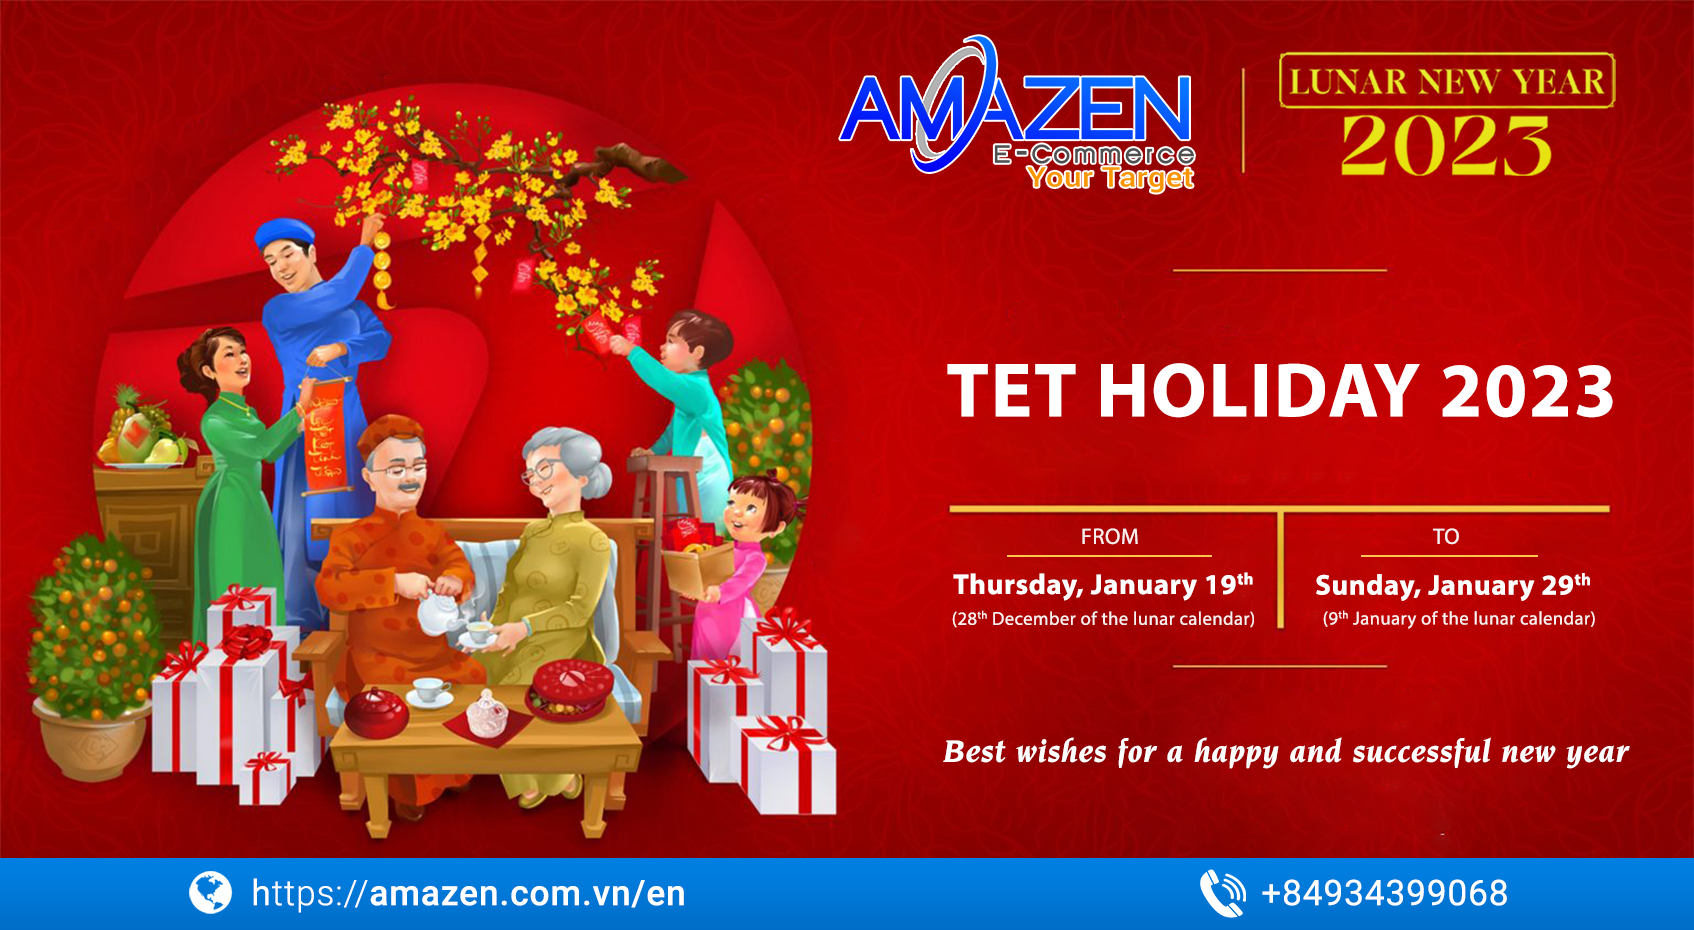 TET HOLIDAY 2023 CLOSING ANNOUNCEMENT